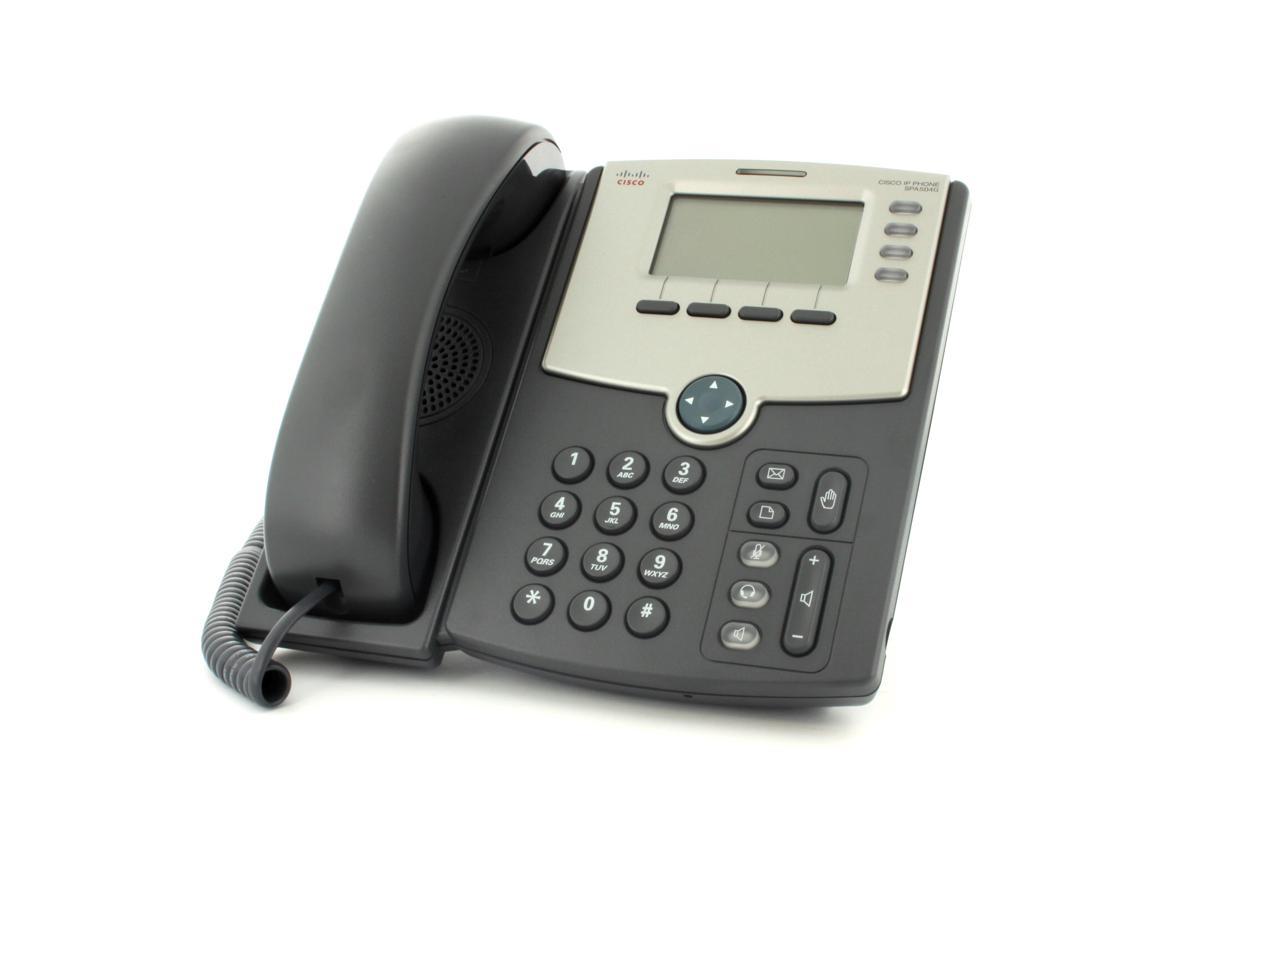 Cisco SPA504G 4-line IP Phone for sale online 